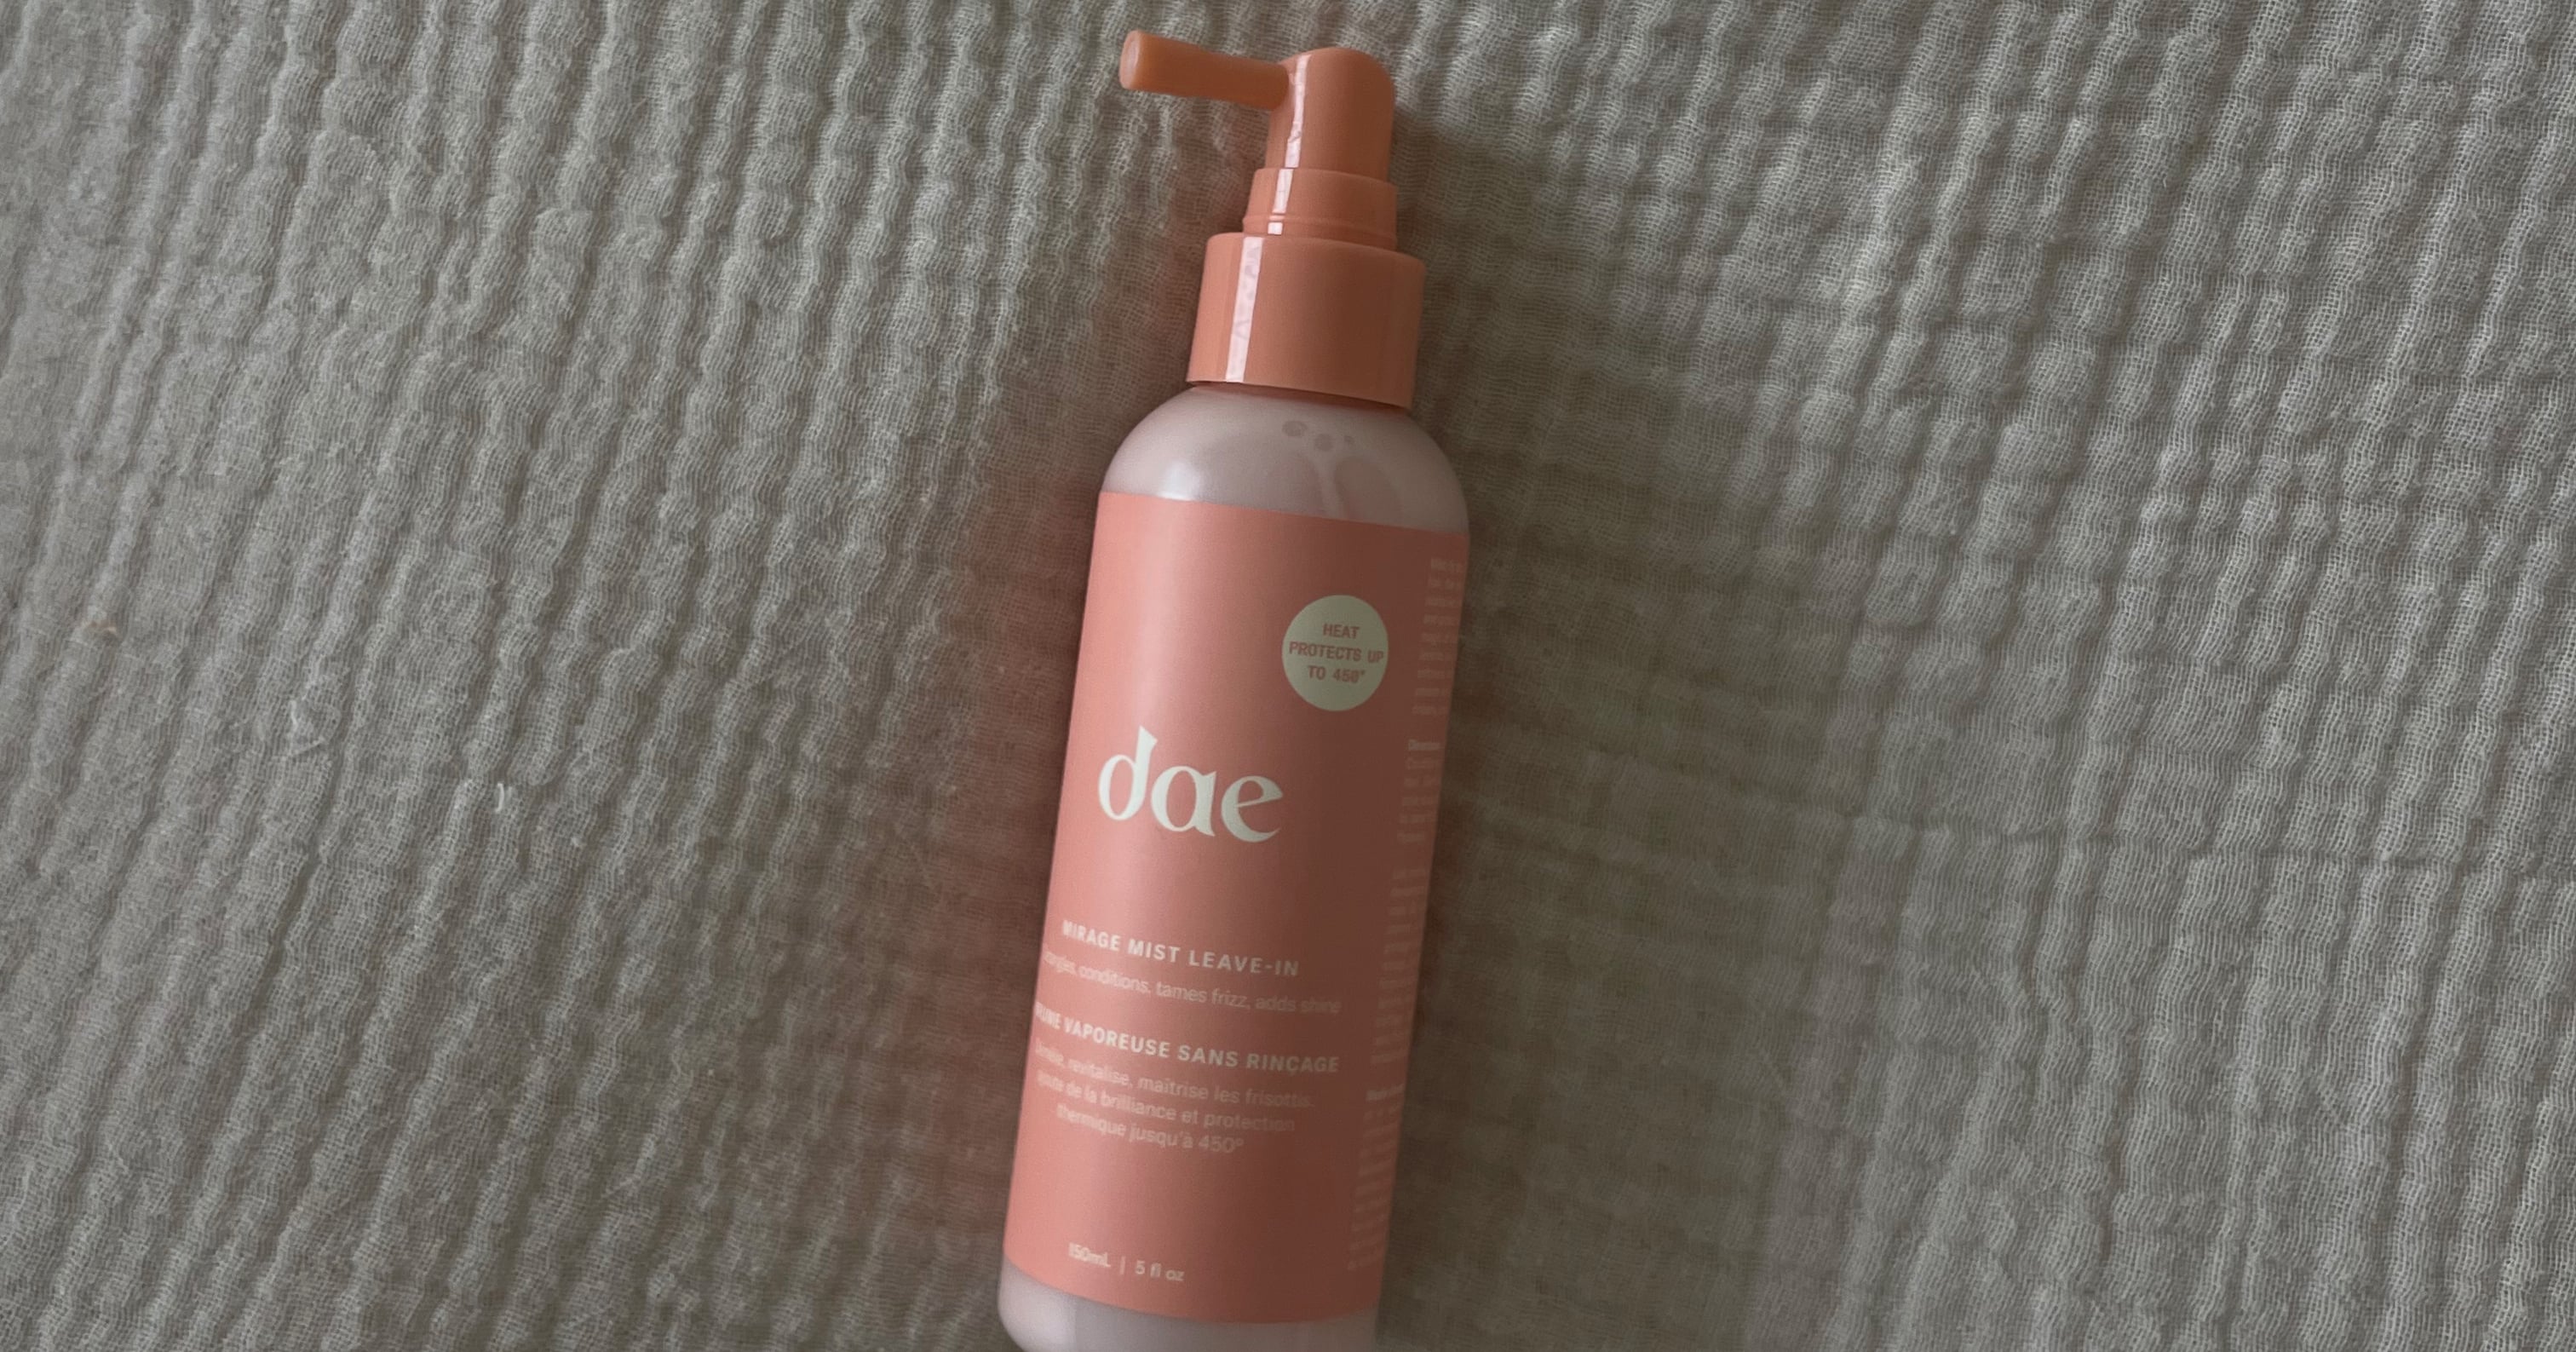 I Got My Hands on Dae's Newest Hair Product - Here Are My Honest Thoughts